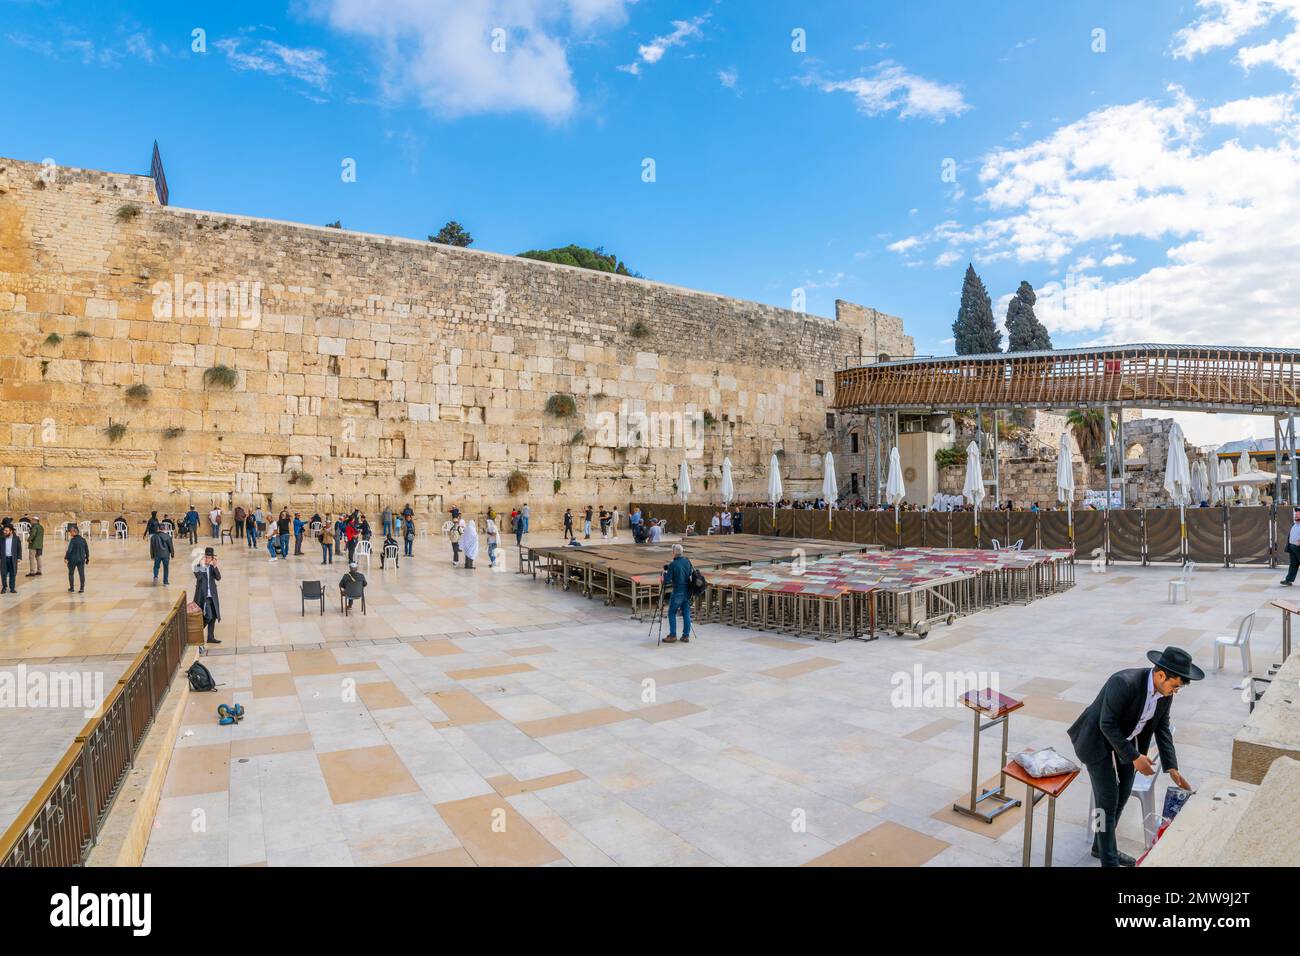 The Mens Side Of The Western Or Buraq Wall Known As The Wailing Wall